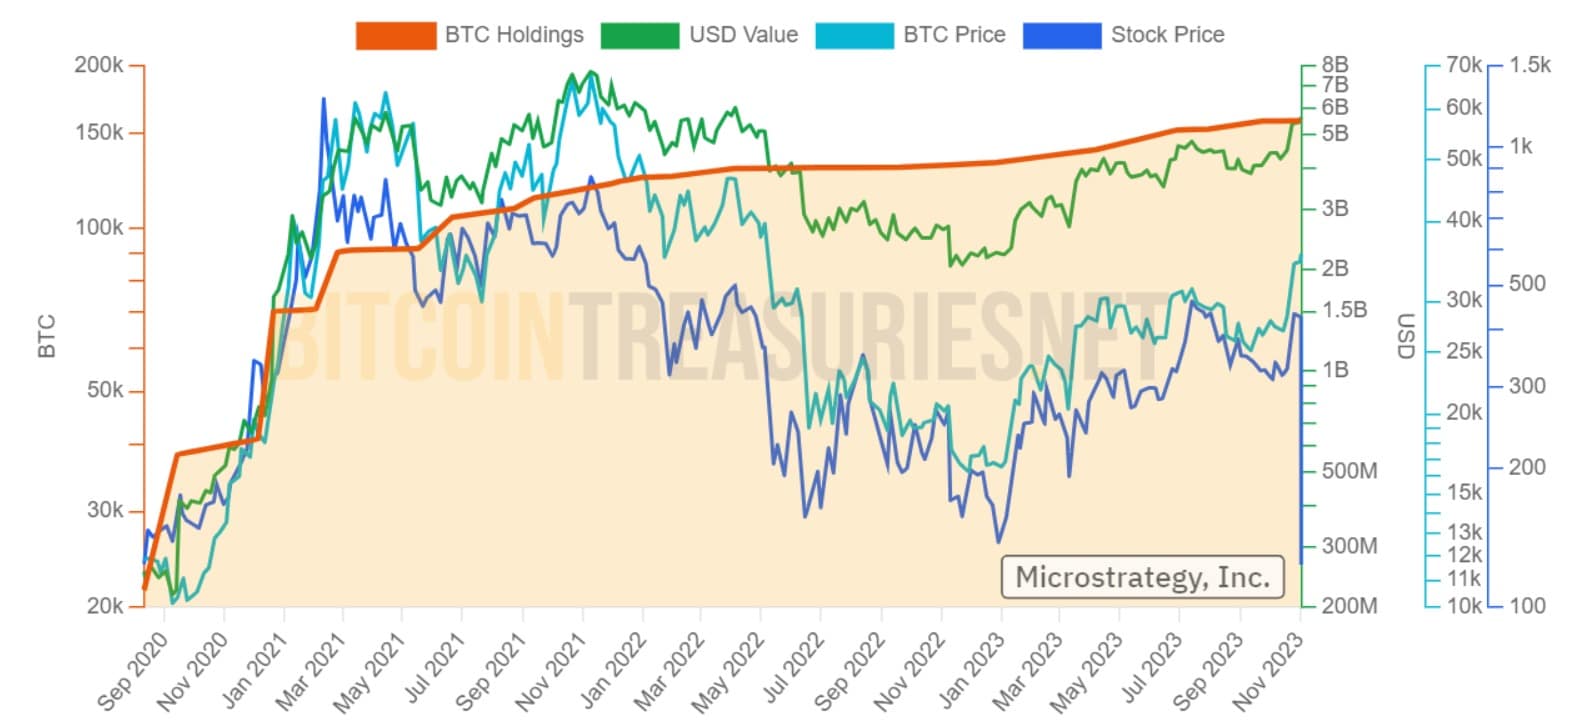 MicroStrategy's long-term BTC purchases